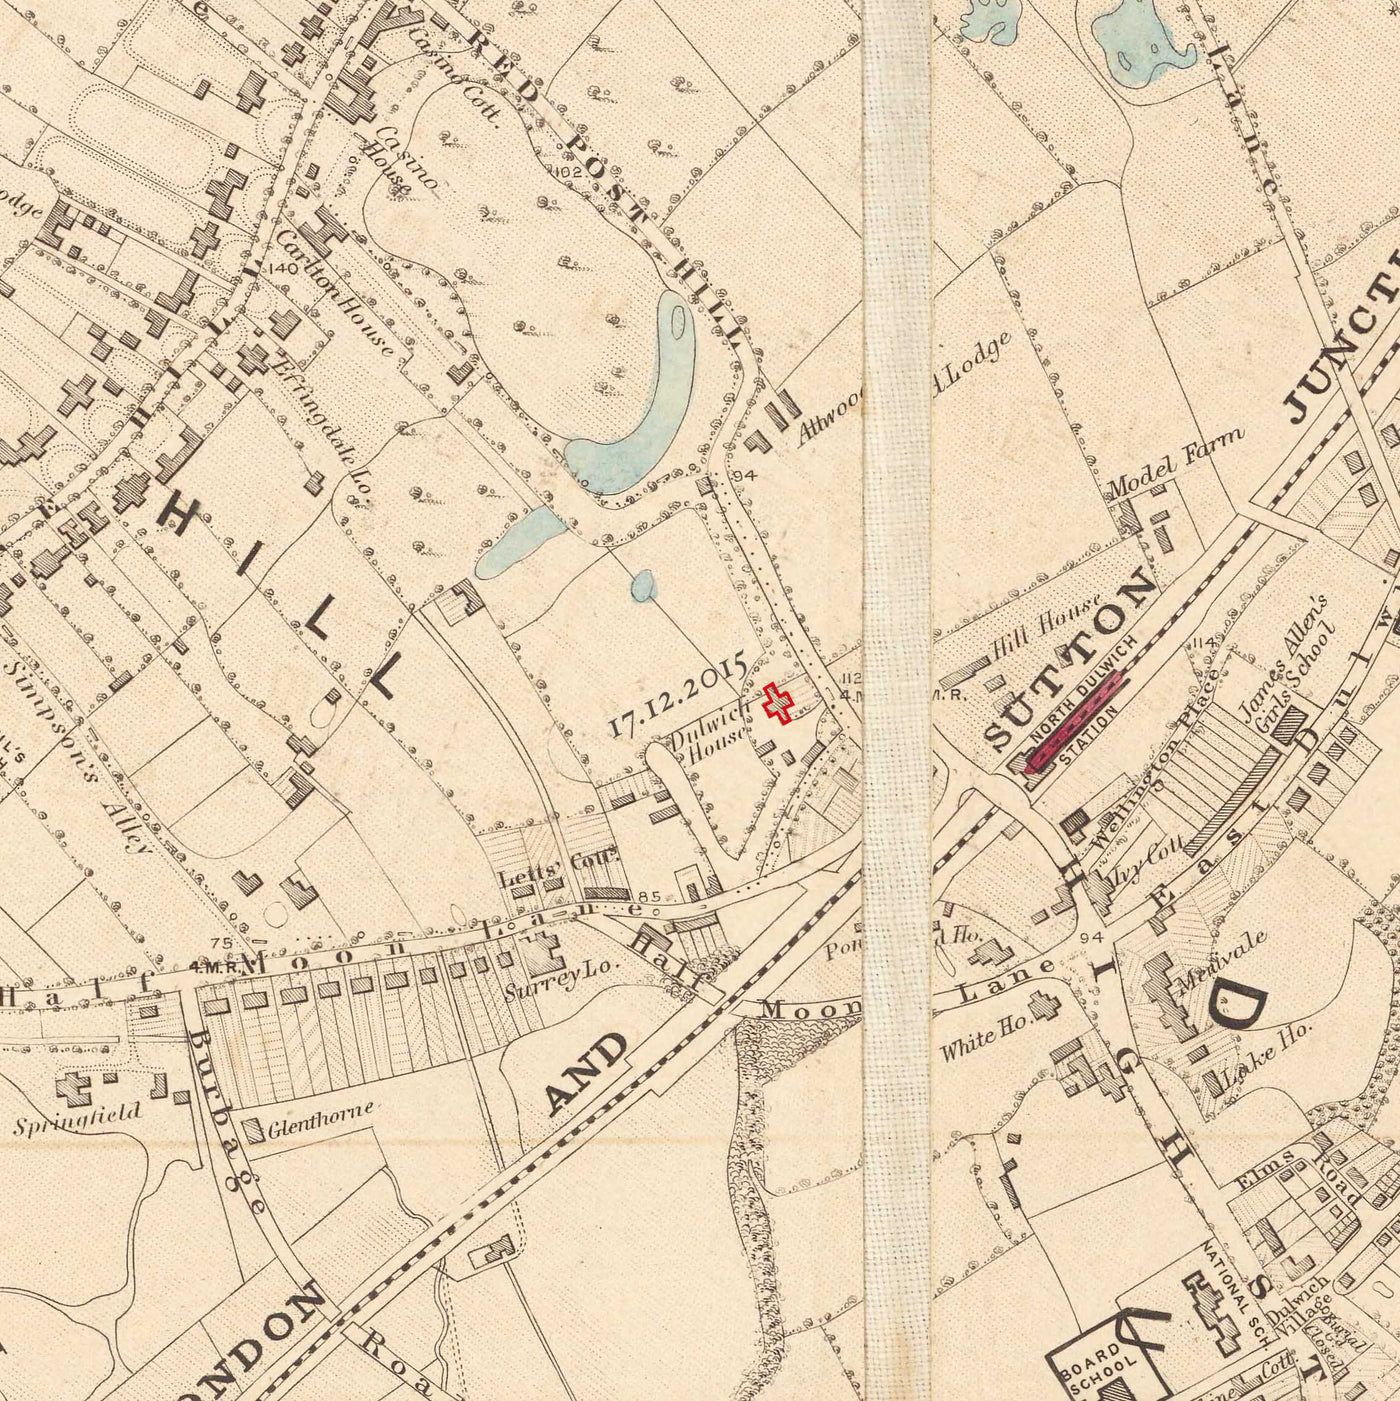 Old Colour Map of South London in 1891 - Battersea, Chelsea, Oval, Stockwell, Wandsworth - SW3, SW1, SE11, SW8, SW11, SW9, SW4